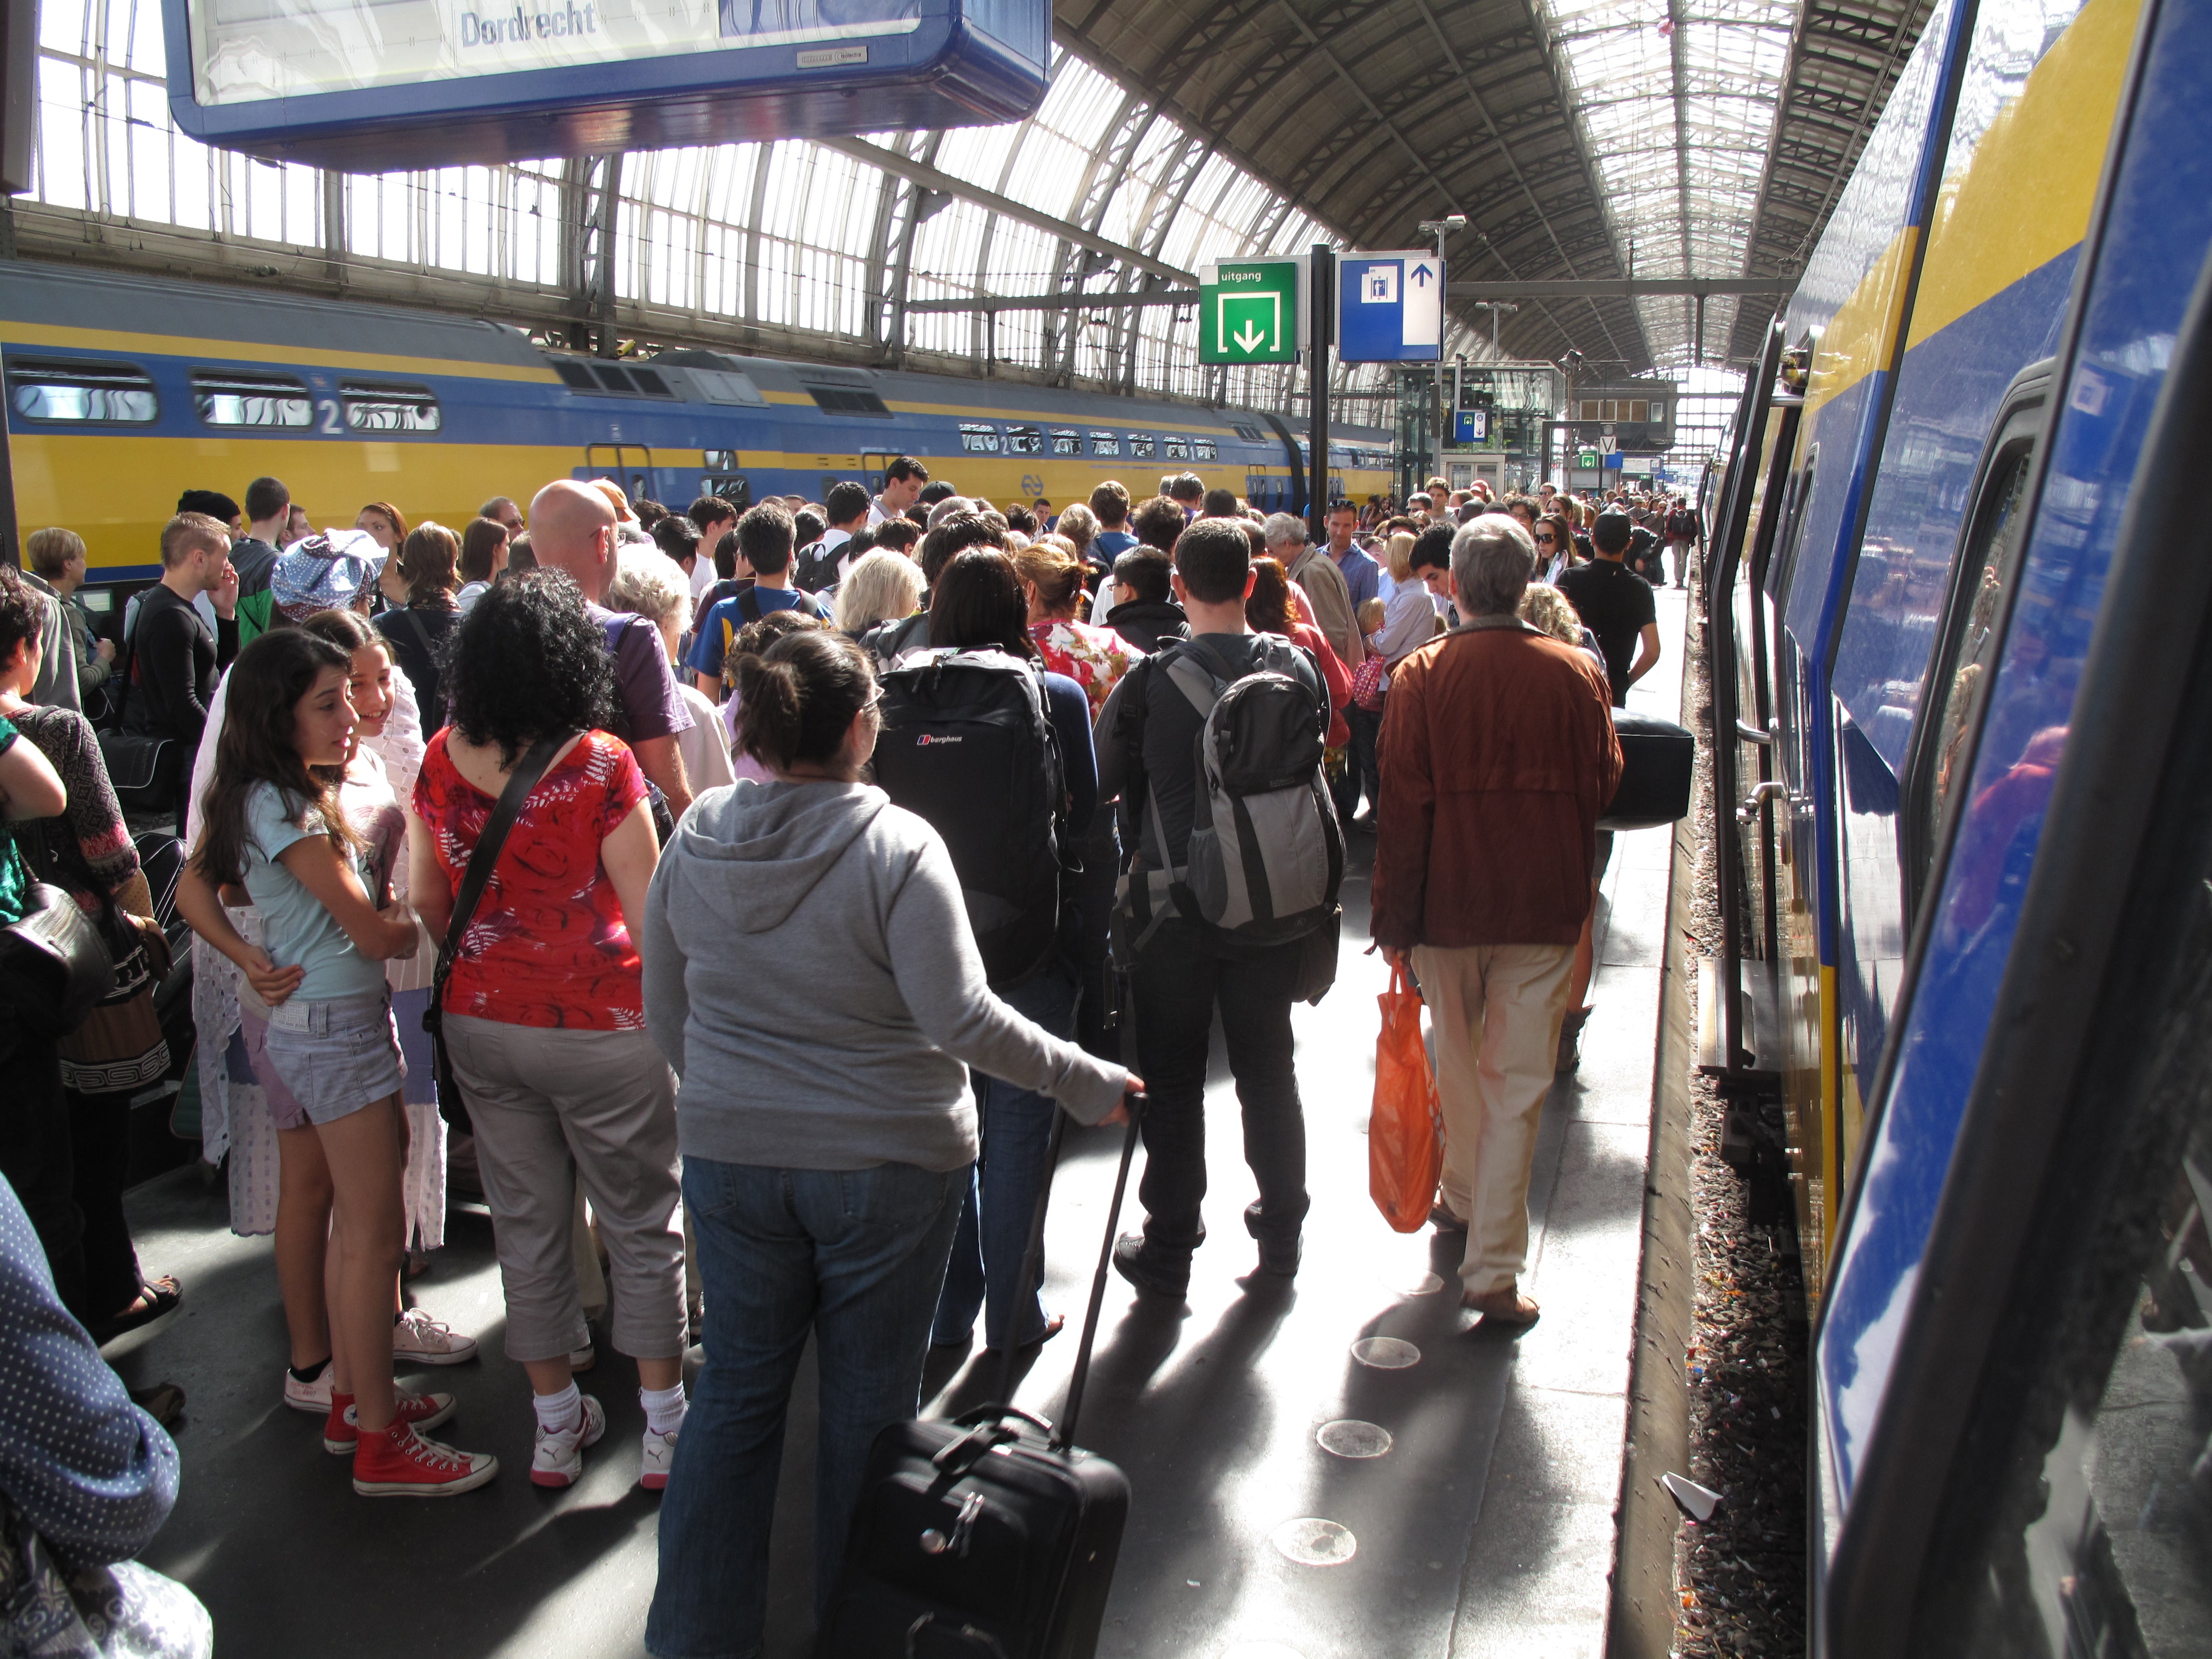 Keeping track: Passengers at Amsterdam Centraal station